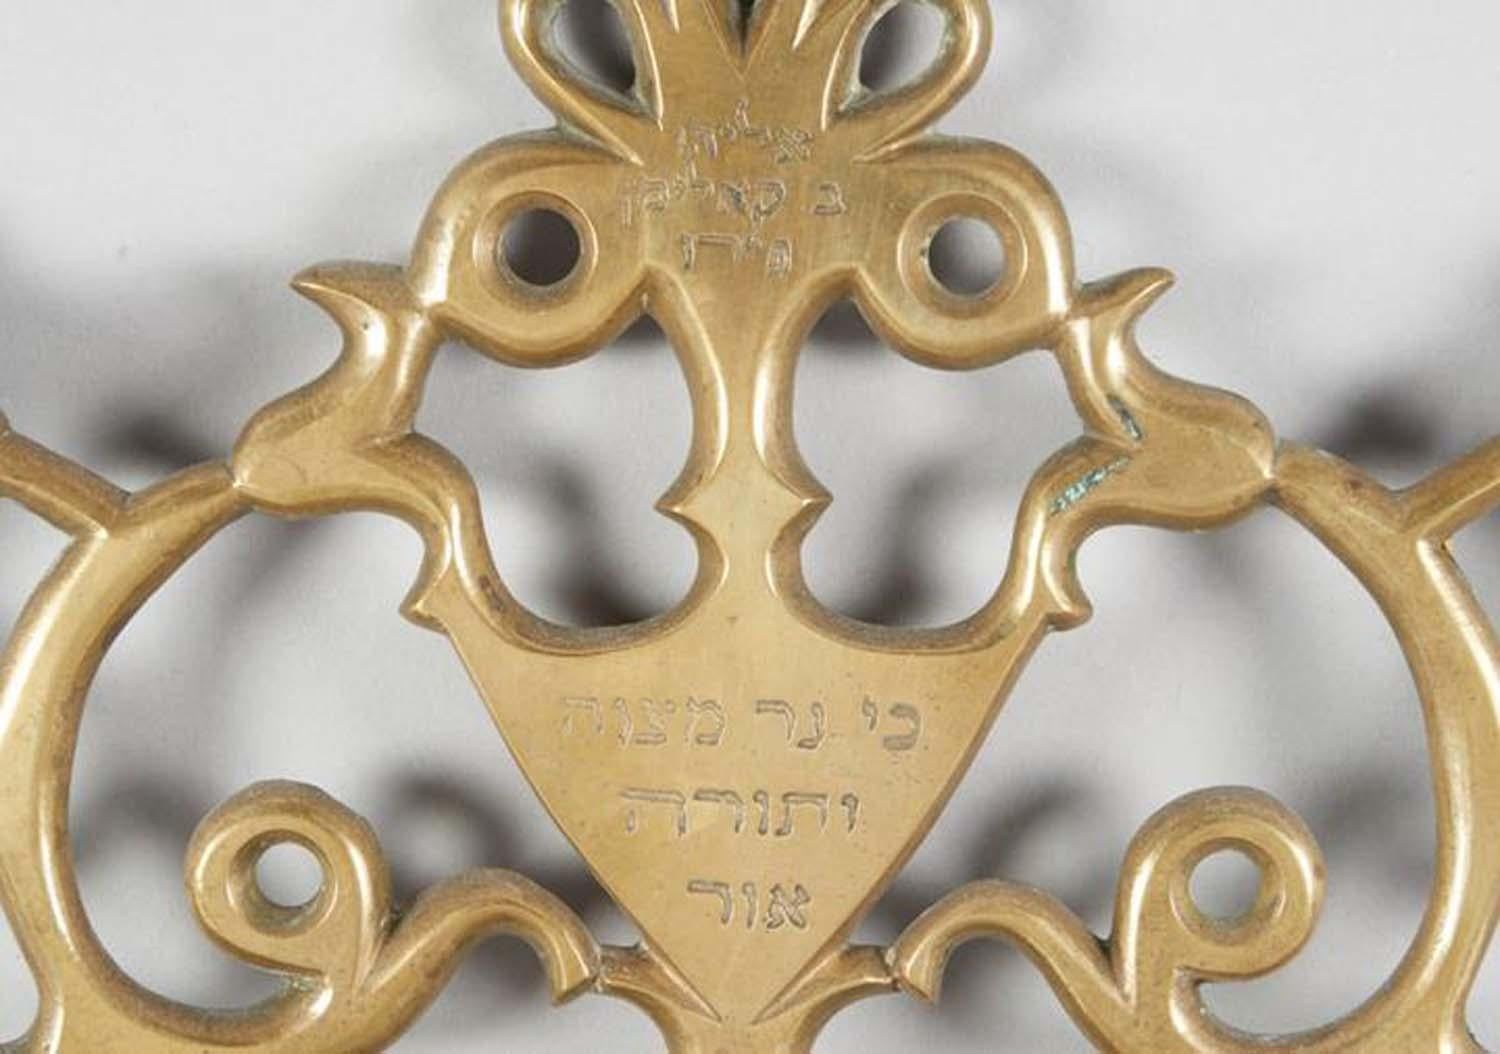 Brass Hanukkah Lamp, Salonika, Greece, 19th century.
Openwork backplate with scrolled branches; three stylized flowers support central triangular cartouche bearing Hebrew inscription “For the commandment is a lamp; the teaching is a light” (Proverbs